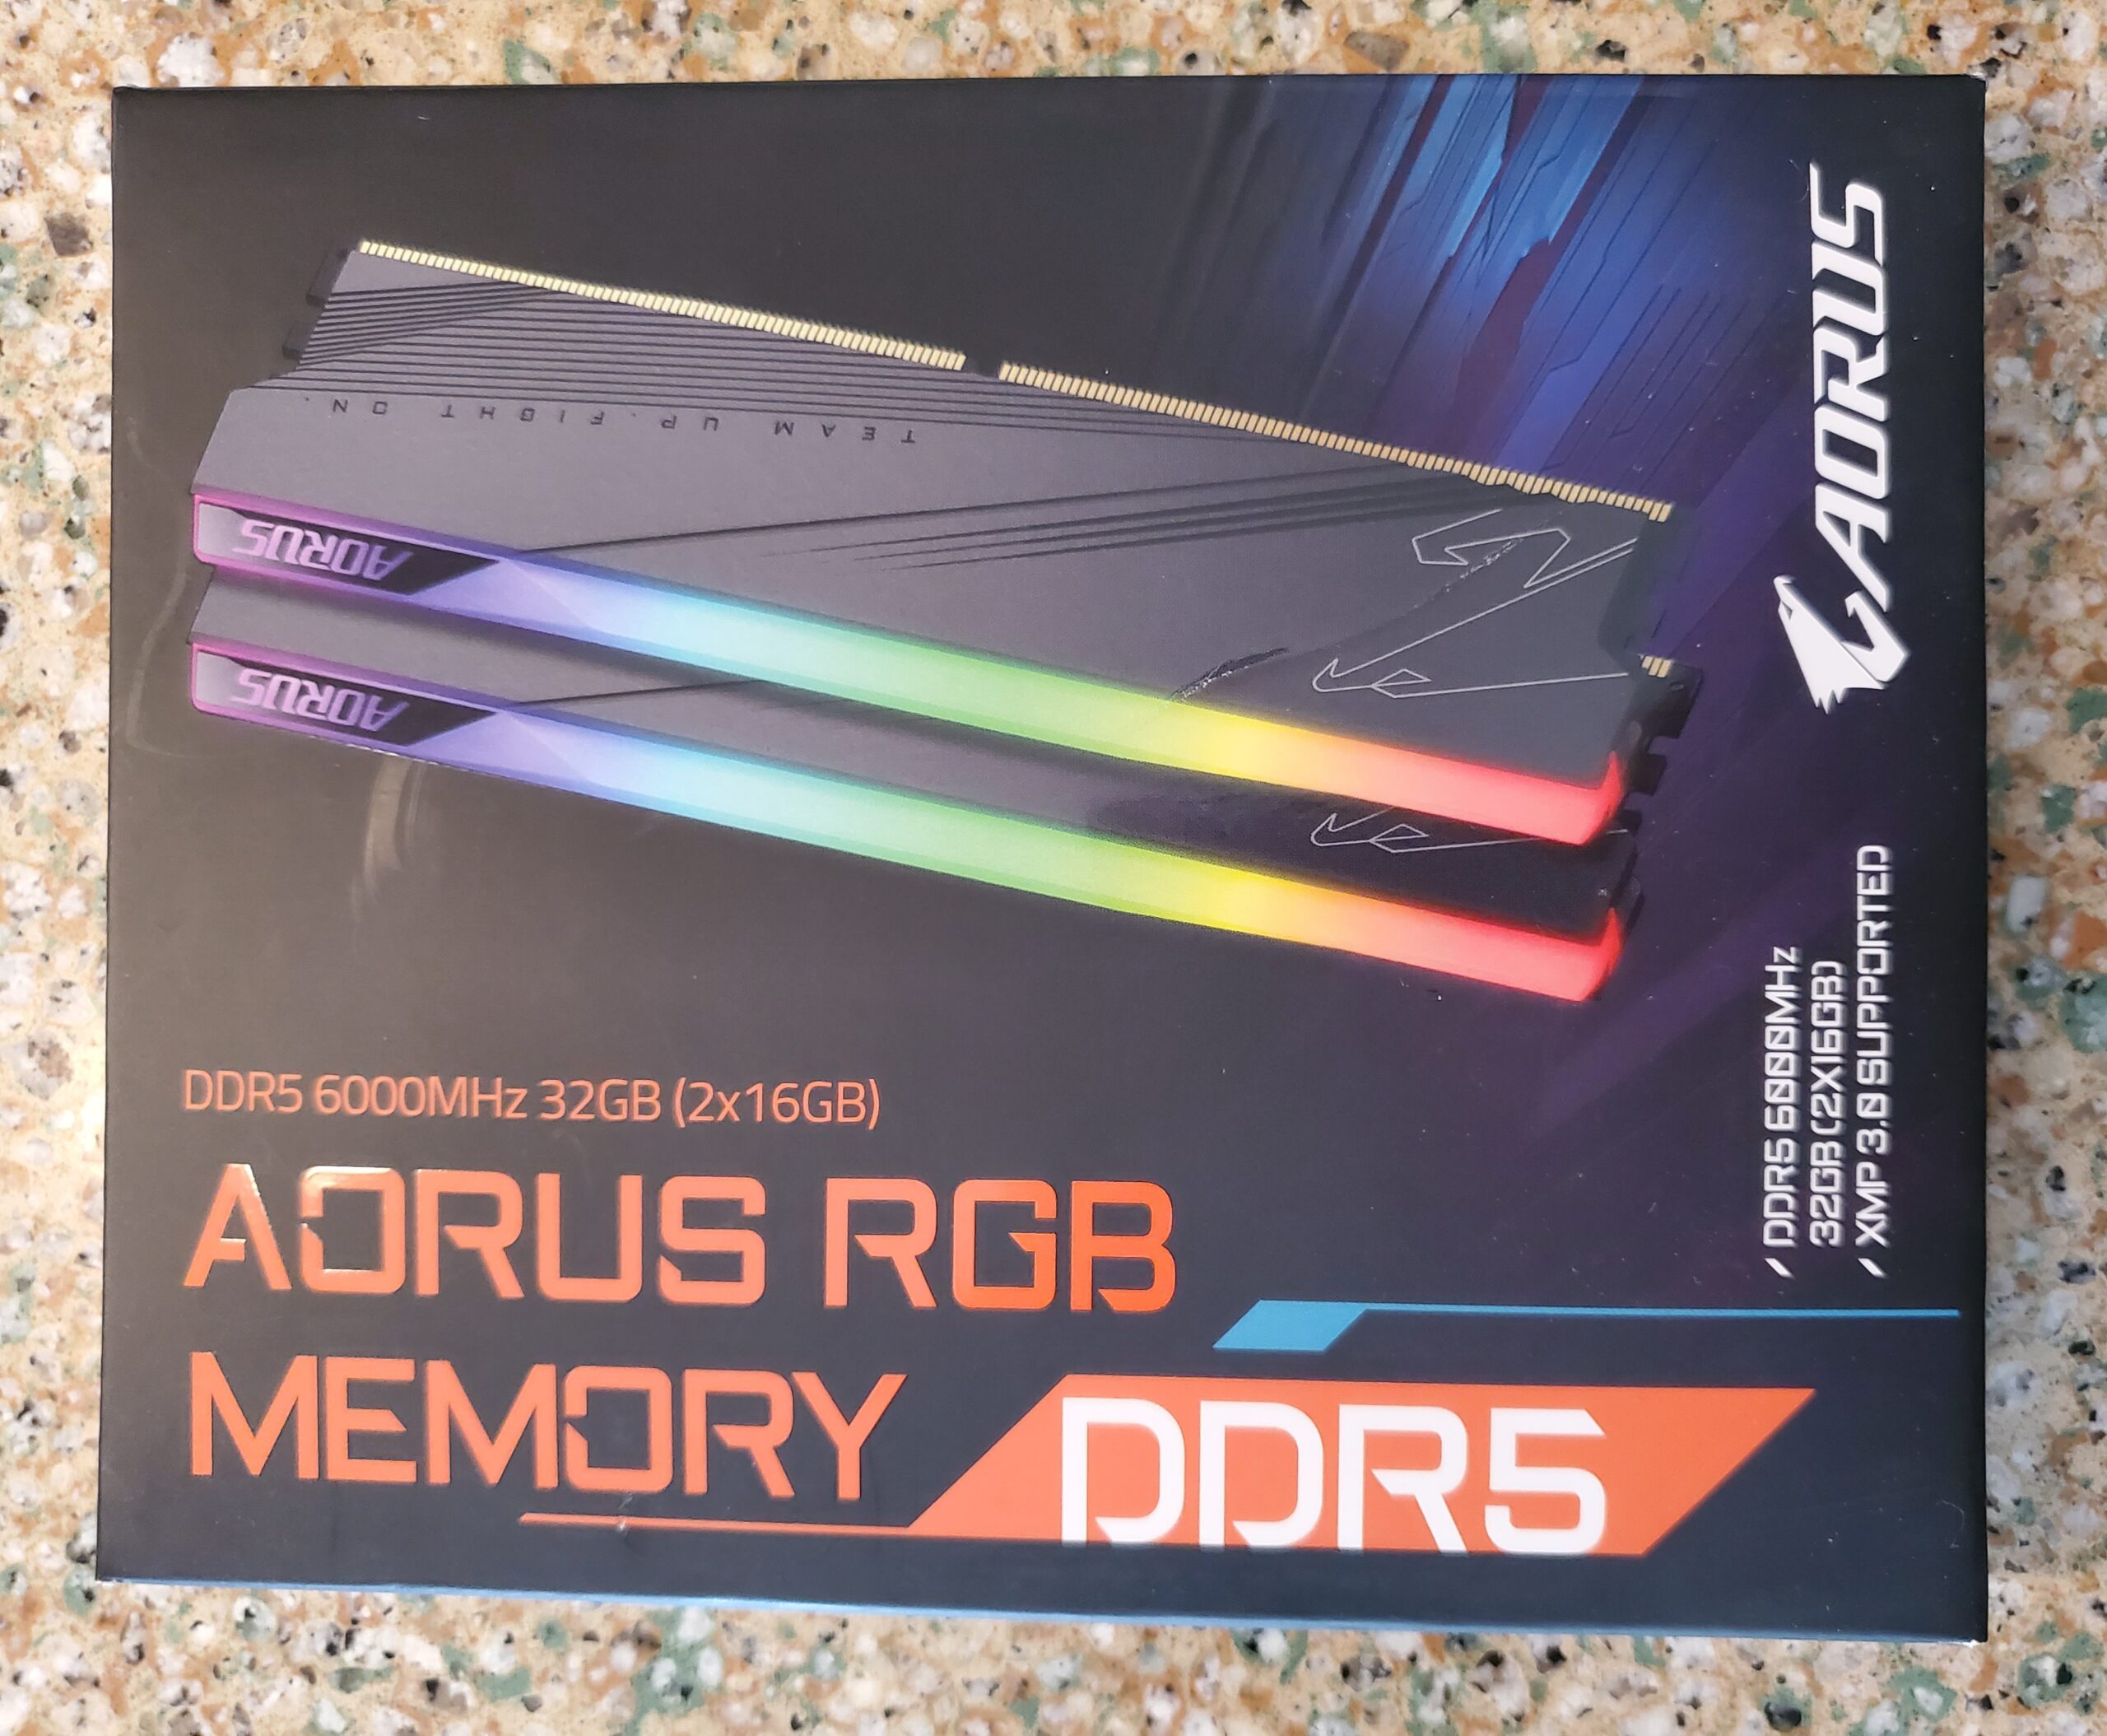 Ddr5 Ram Available, Ddr5 6000mhz Ram Memory